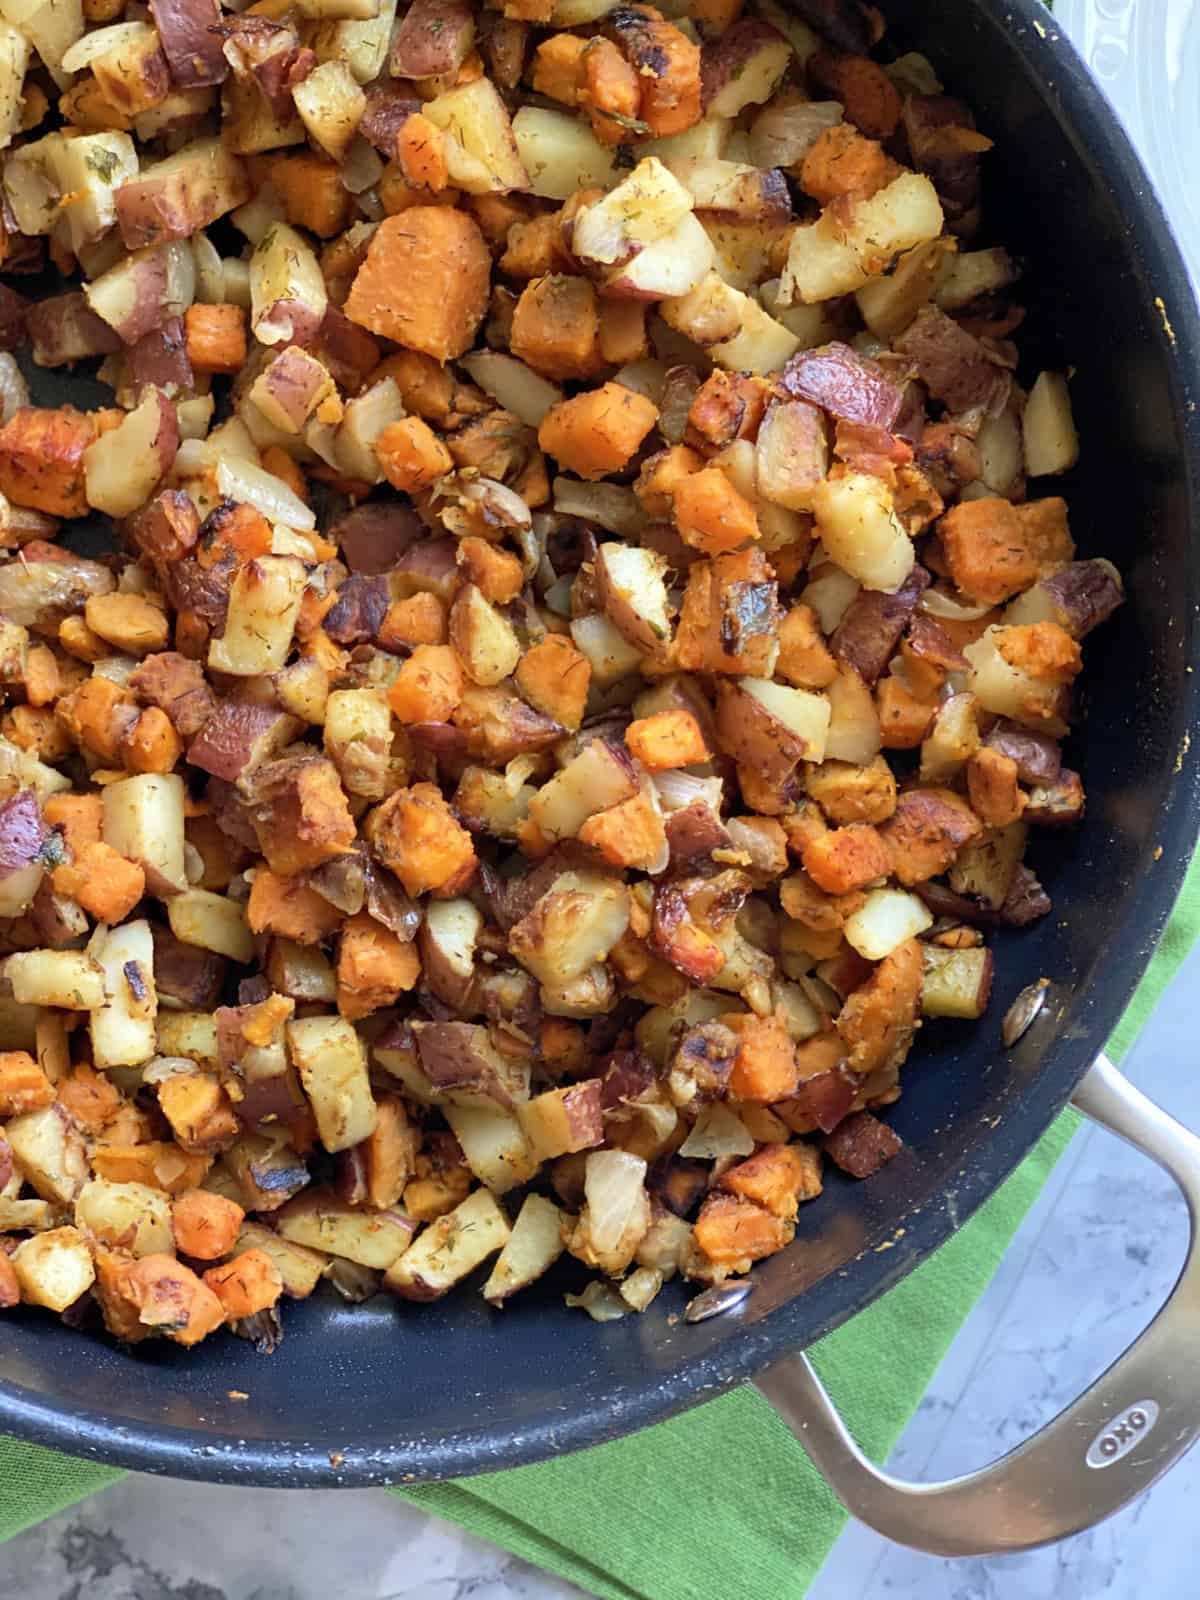 Top view of a skillet filled with fried sweet potatoes and white potatoes.